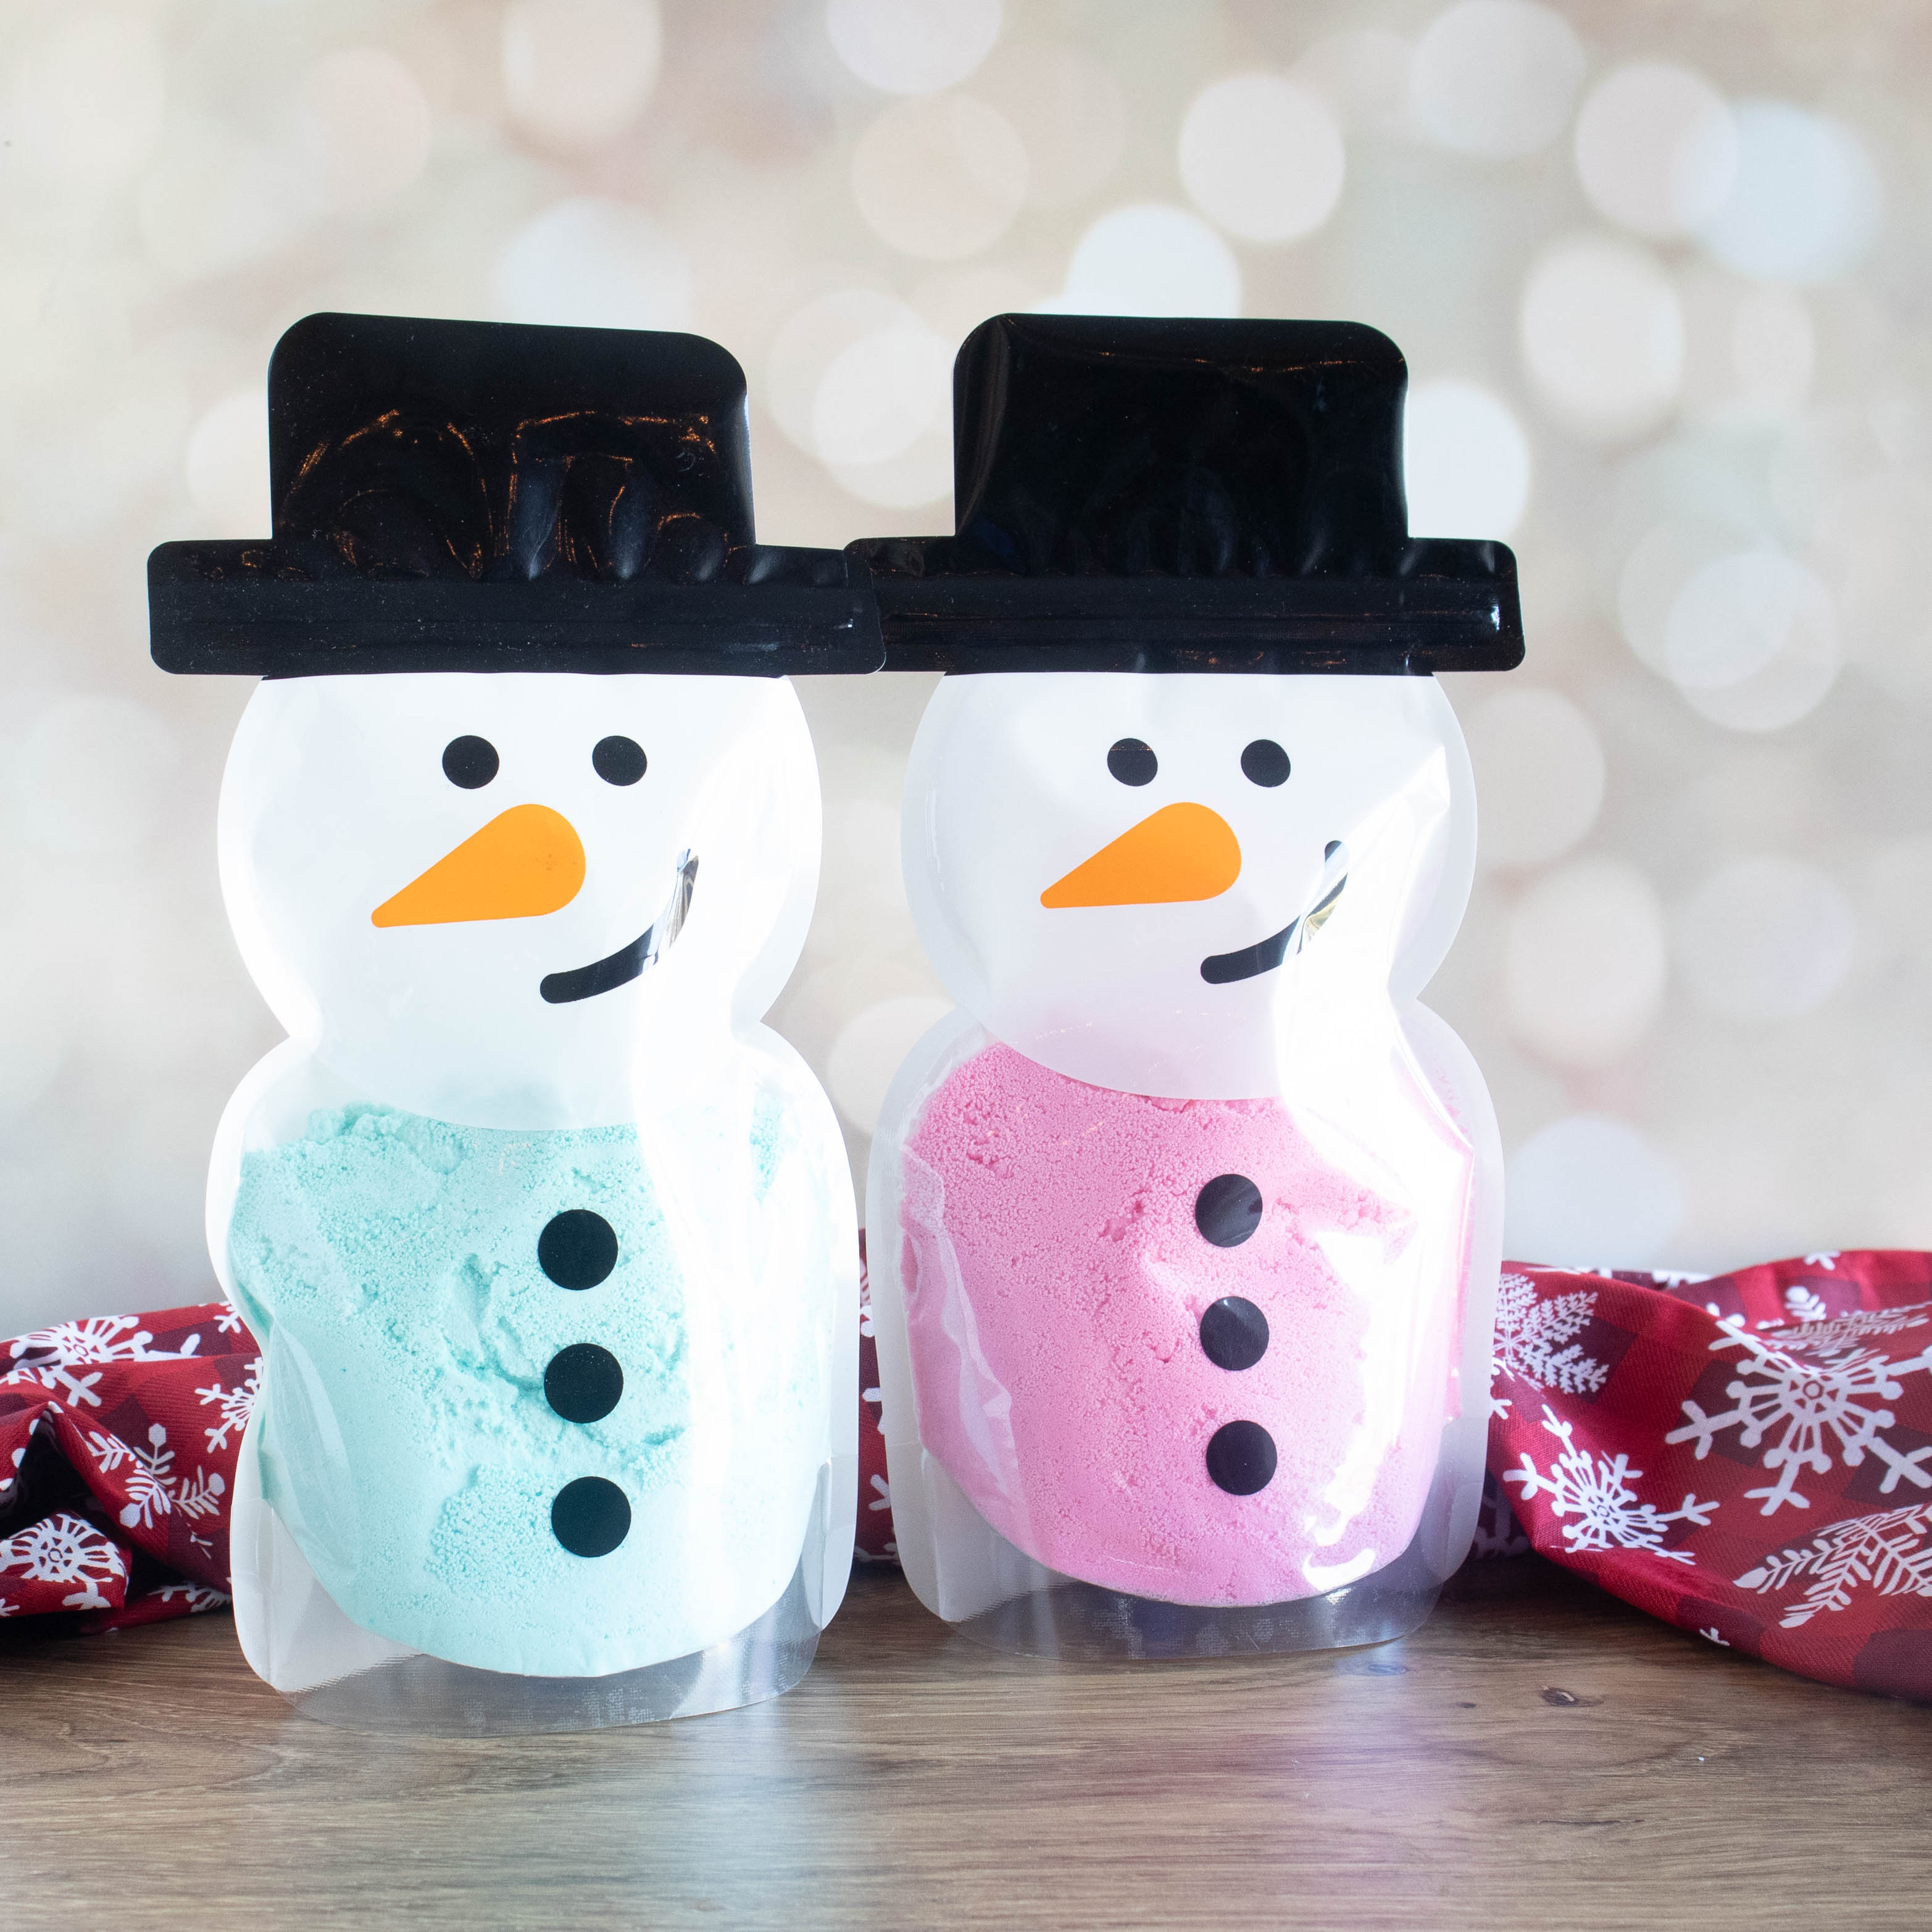 there are 2 bags in the shape of snowmen standing side by side. the bags have a snowman face, hat and buttons to make them super cute! there is green bath bomb powder in the left one and pink in the right one. there is a red fabric running behind the snowmen and it has white snowflakes on it.